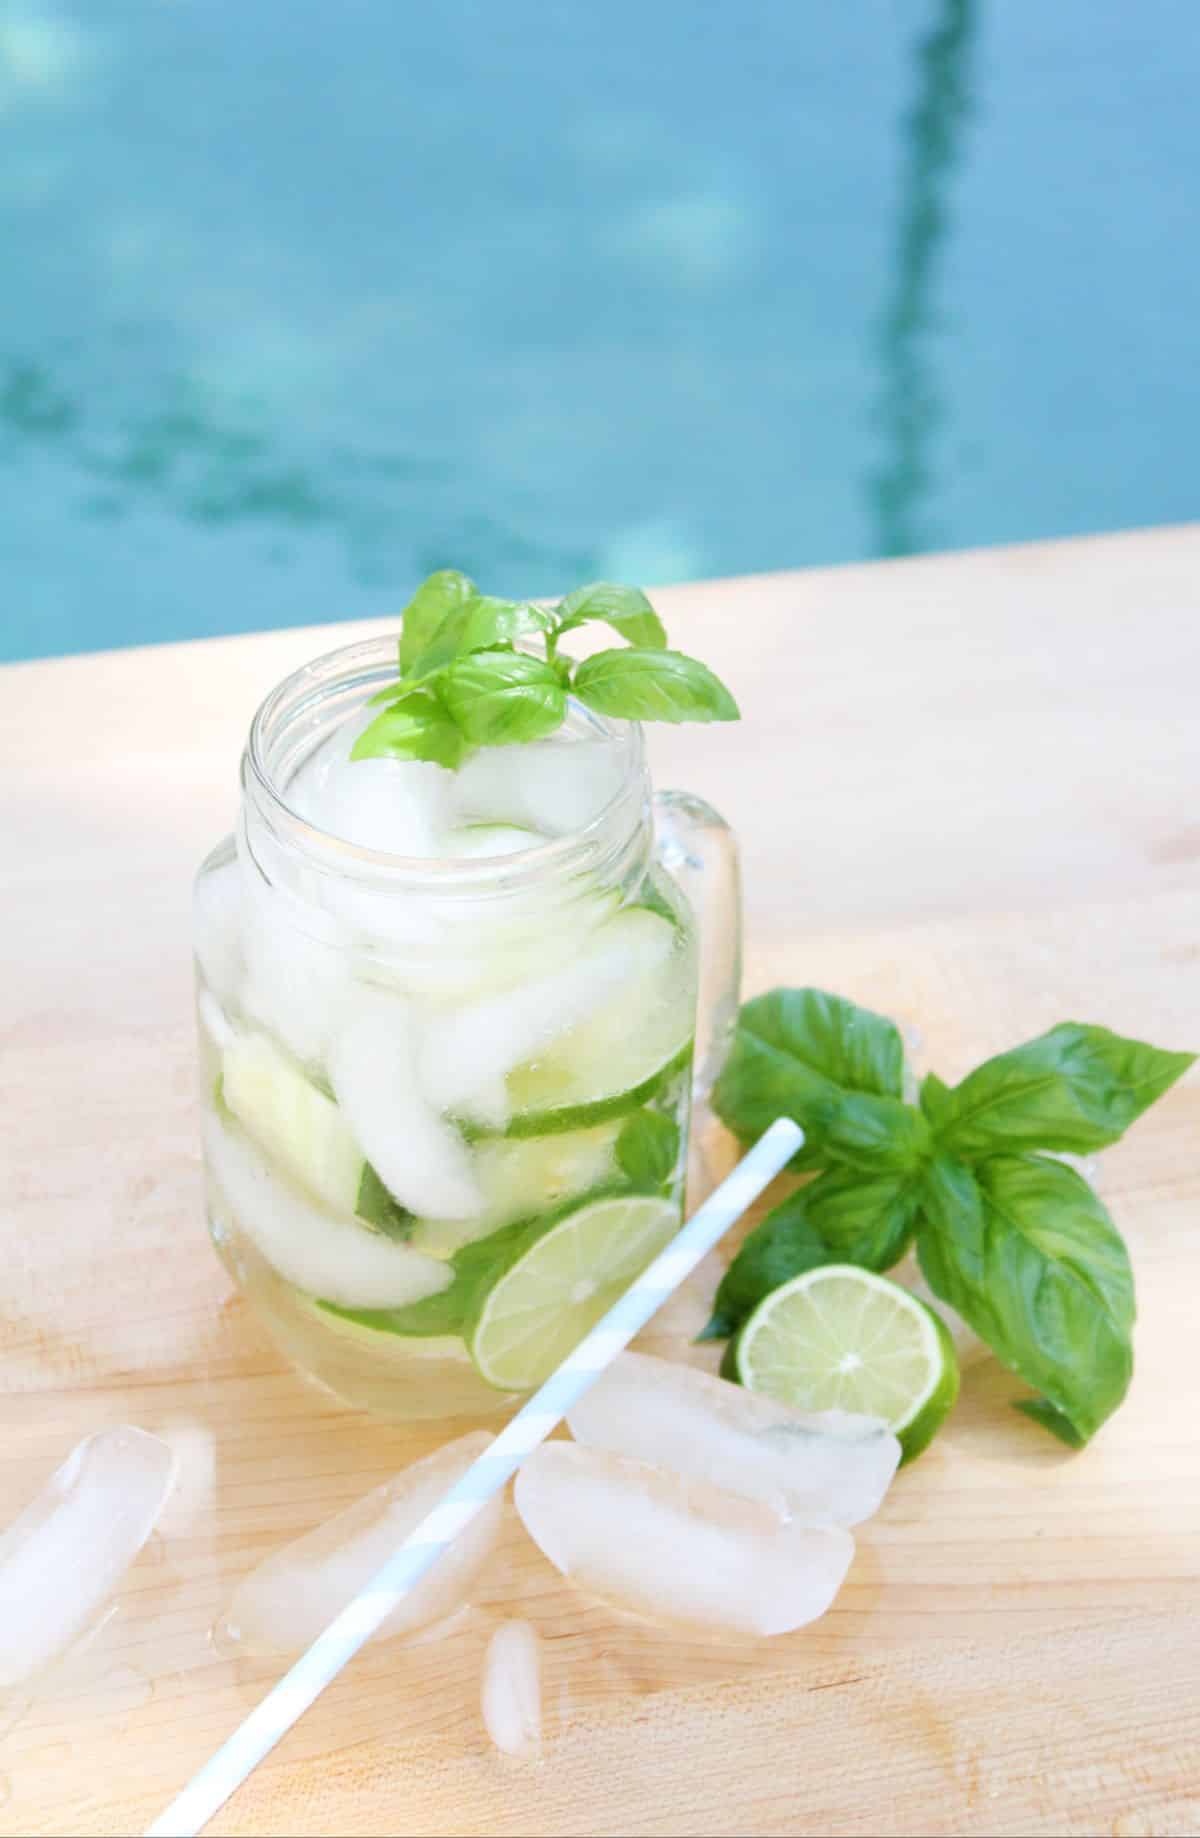 Cucumber Lime Vodka Cocktail in a serving glass, garnished with basil leaves.